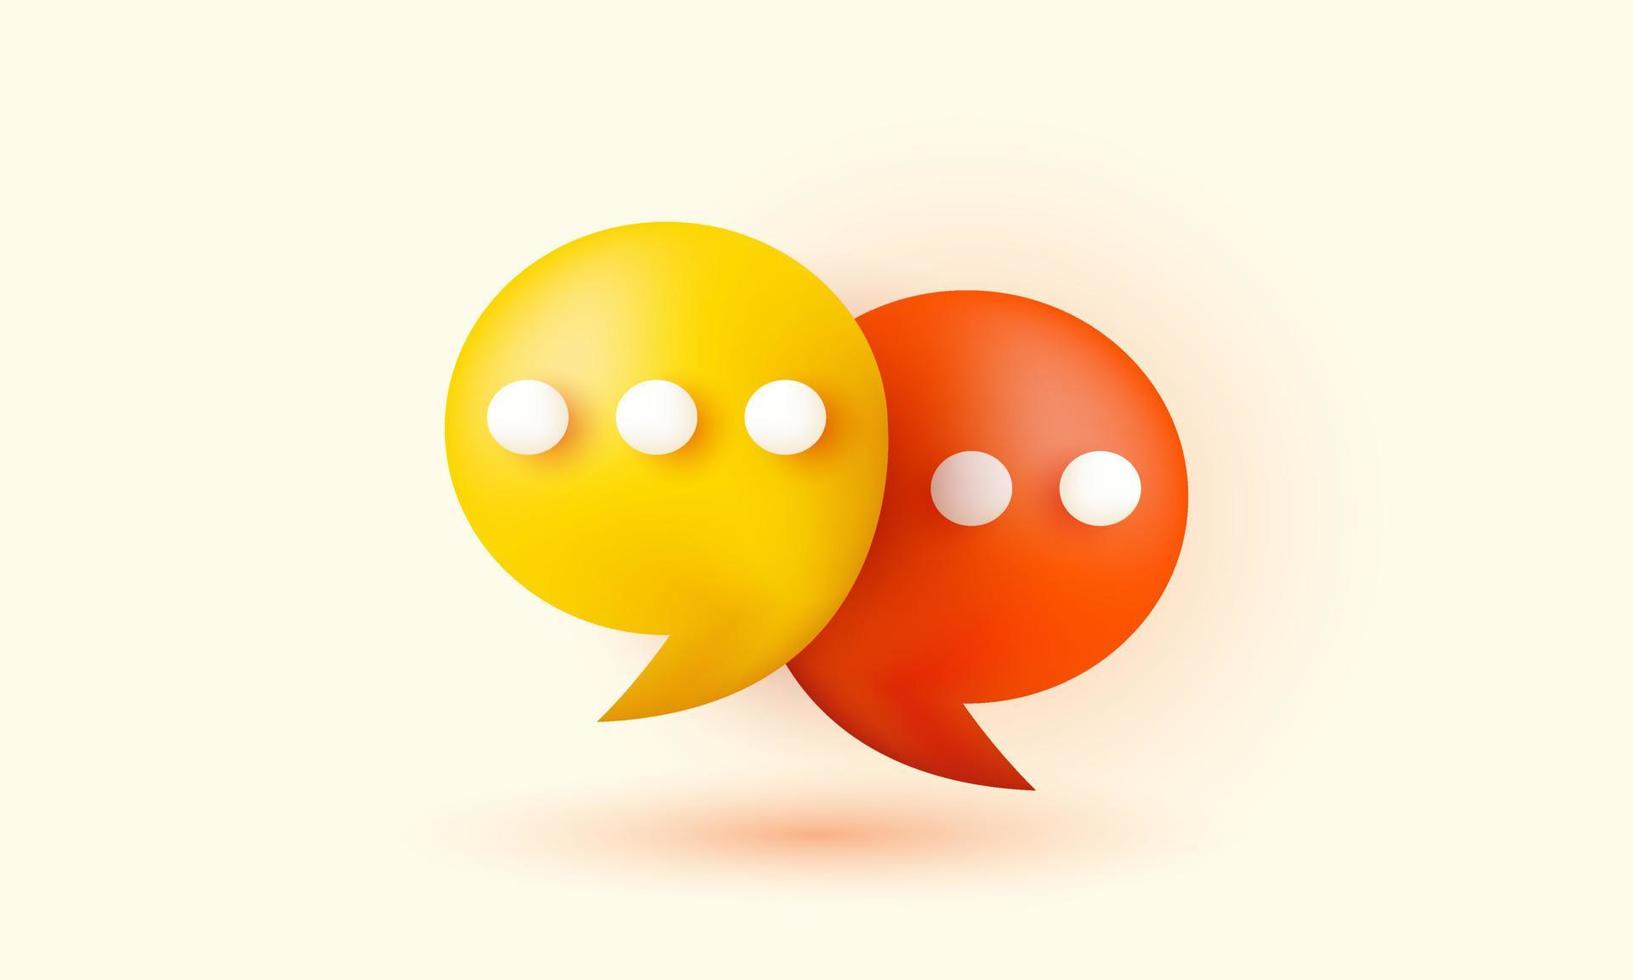 illustration icon vector 3d realistic orange yellow chat bubble talk dialogue messenger online isolated on background